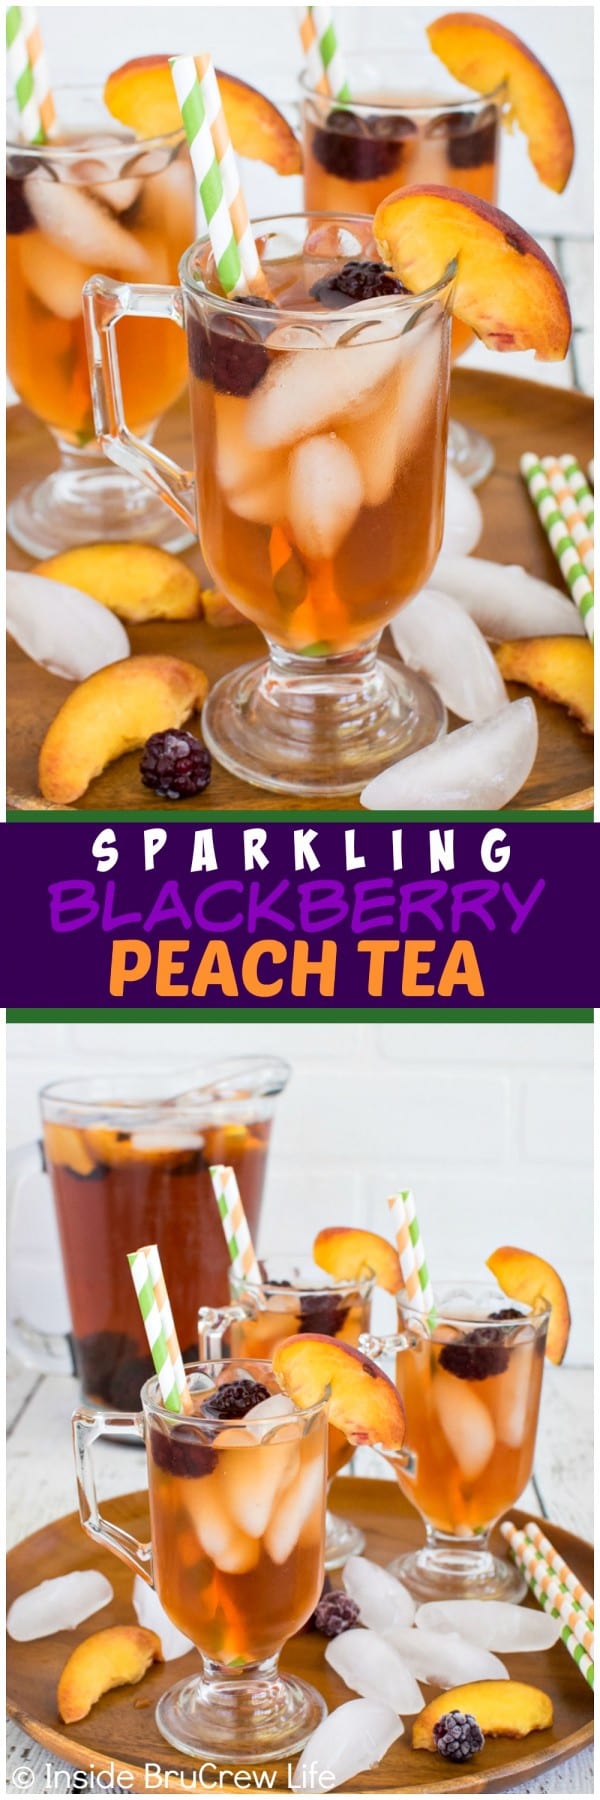 Sparkling Blackberry Peach Tea - this easy 2 ingredient punch is refreshing for a hot day. Great drink recipe!